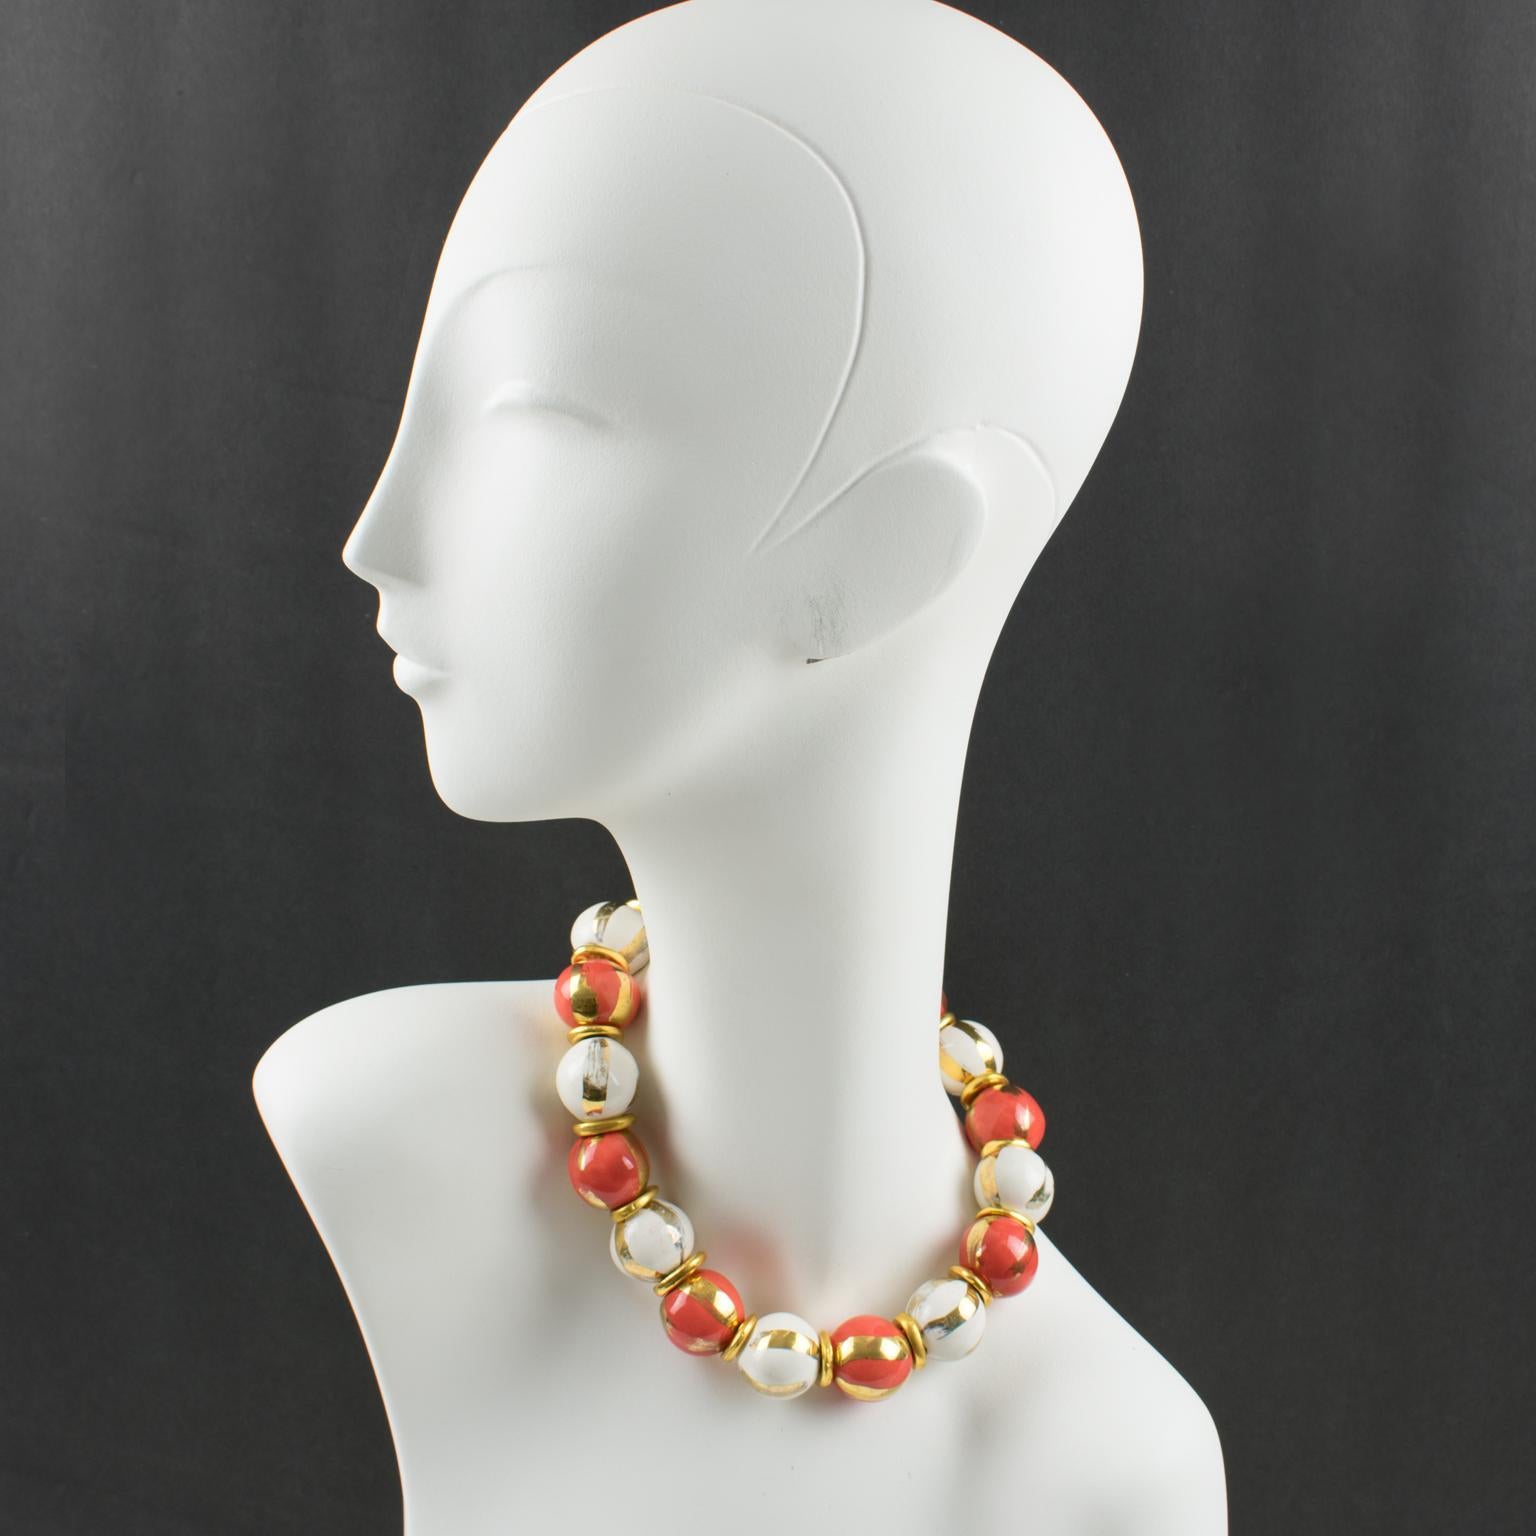 This lovely Edouard Rambaud Paris ceramic choker necklace features a romantic-inspired design with large ceramic beads in assorted white and pink salmon colors ornated with gilt paint. Gilt metal bead spacers are embellishing the design. The choker